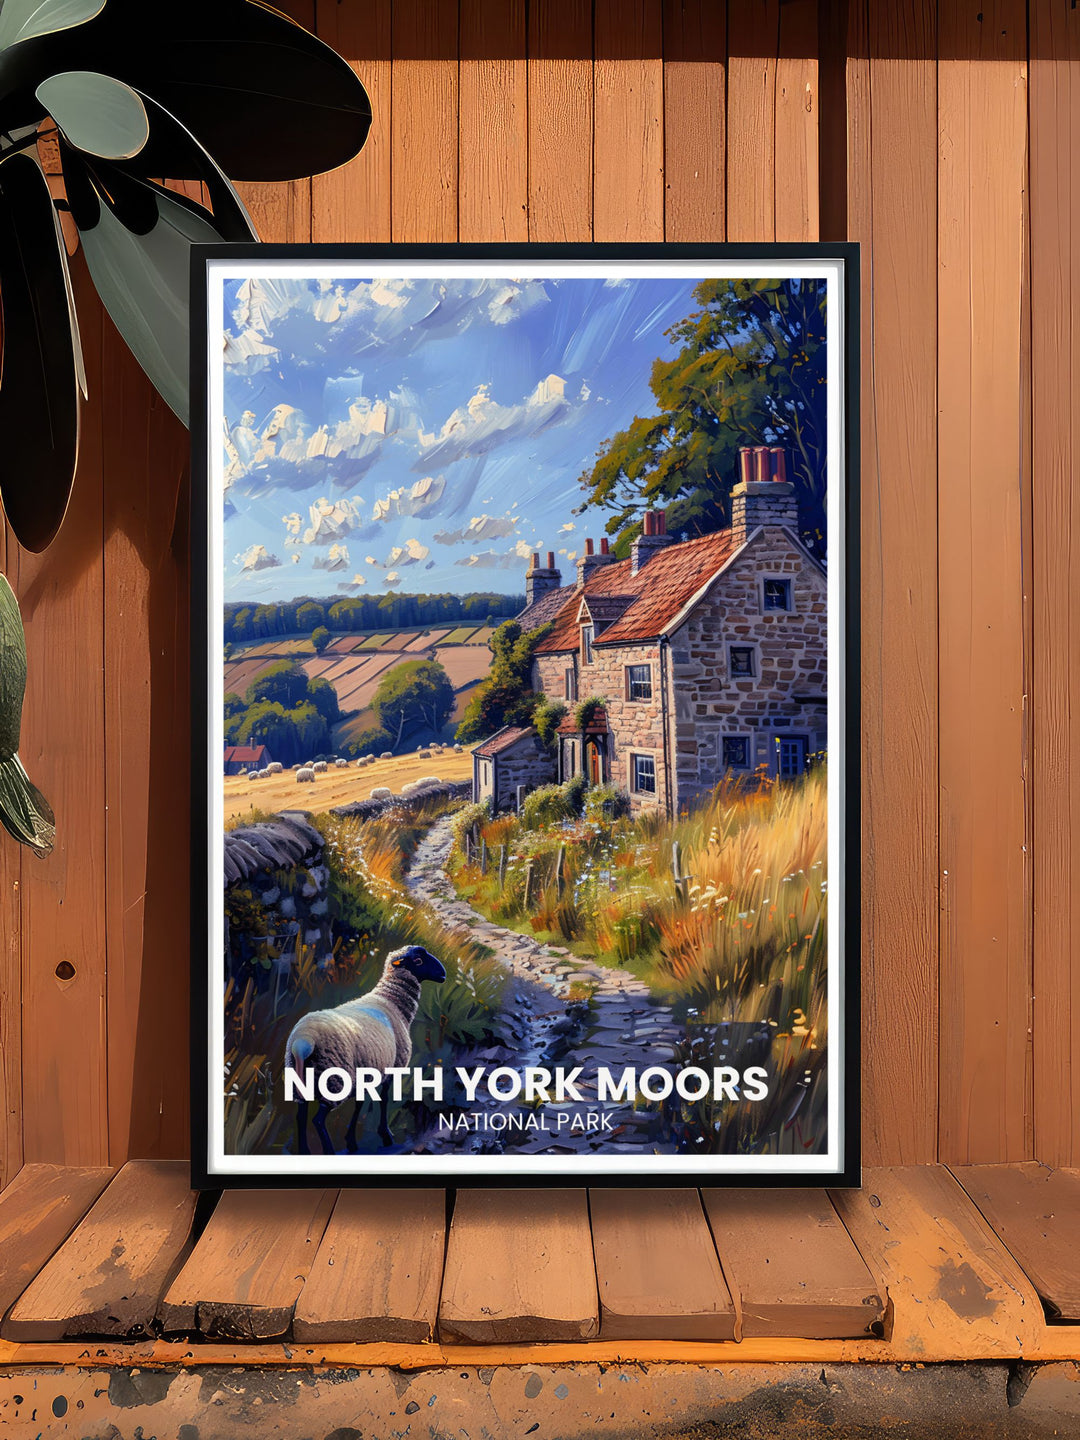 Featuring the historic Goathland Village in North York Moors, this travel poster brings to life the vibrant atmosphere, cultural heritage, and stunning natural backdrop, making it a perfect addition to any collection of British art.